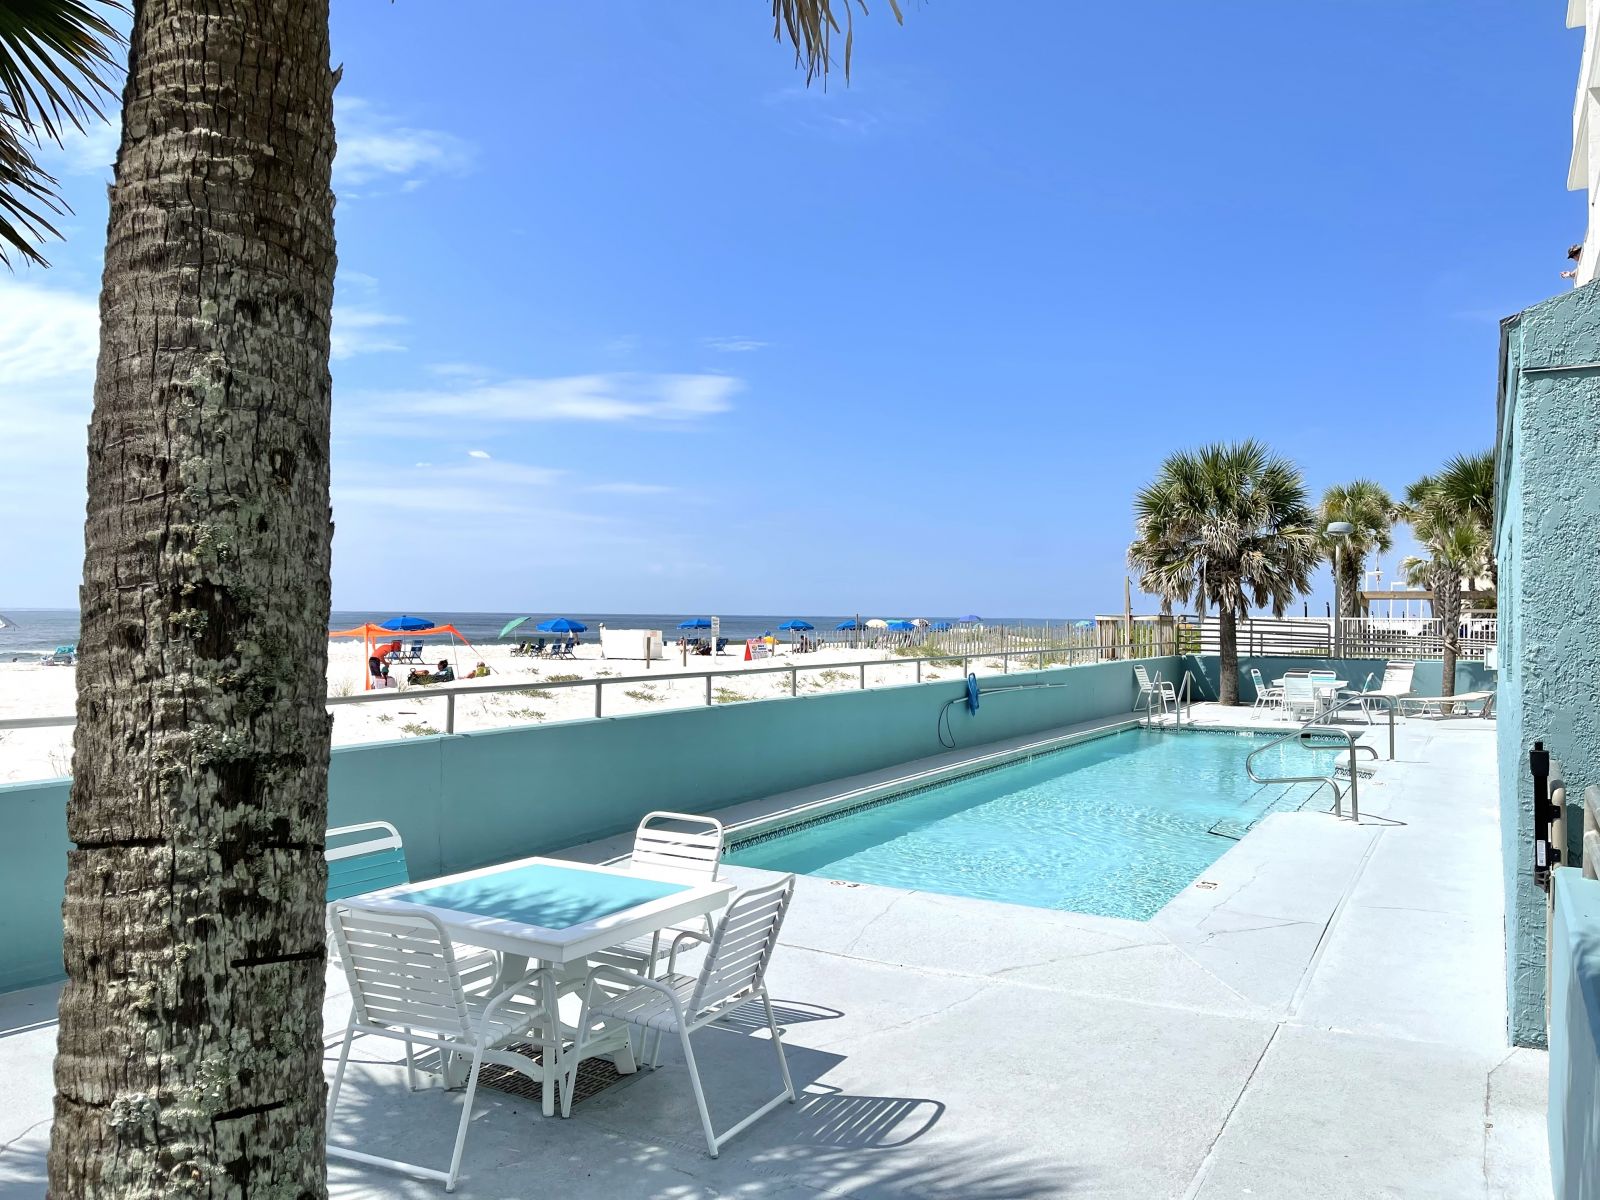 3 Gulf Shores Vacation Rentals Perfect for Spring Break Gulf Shores Blog